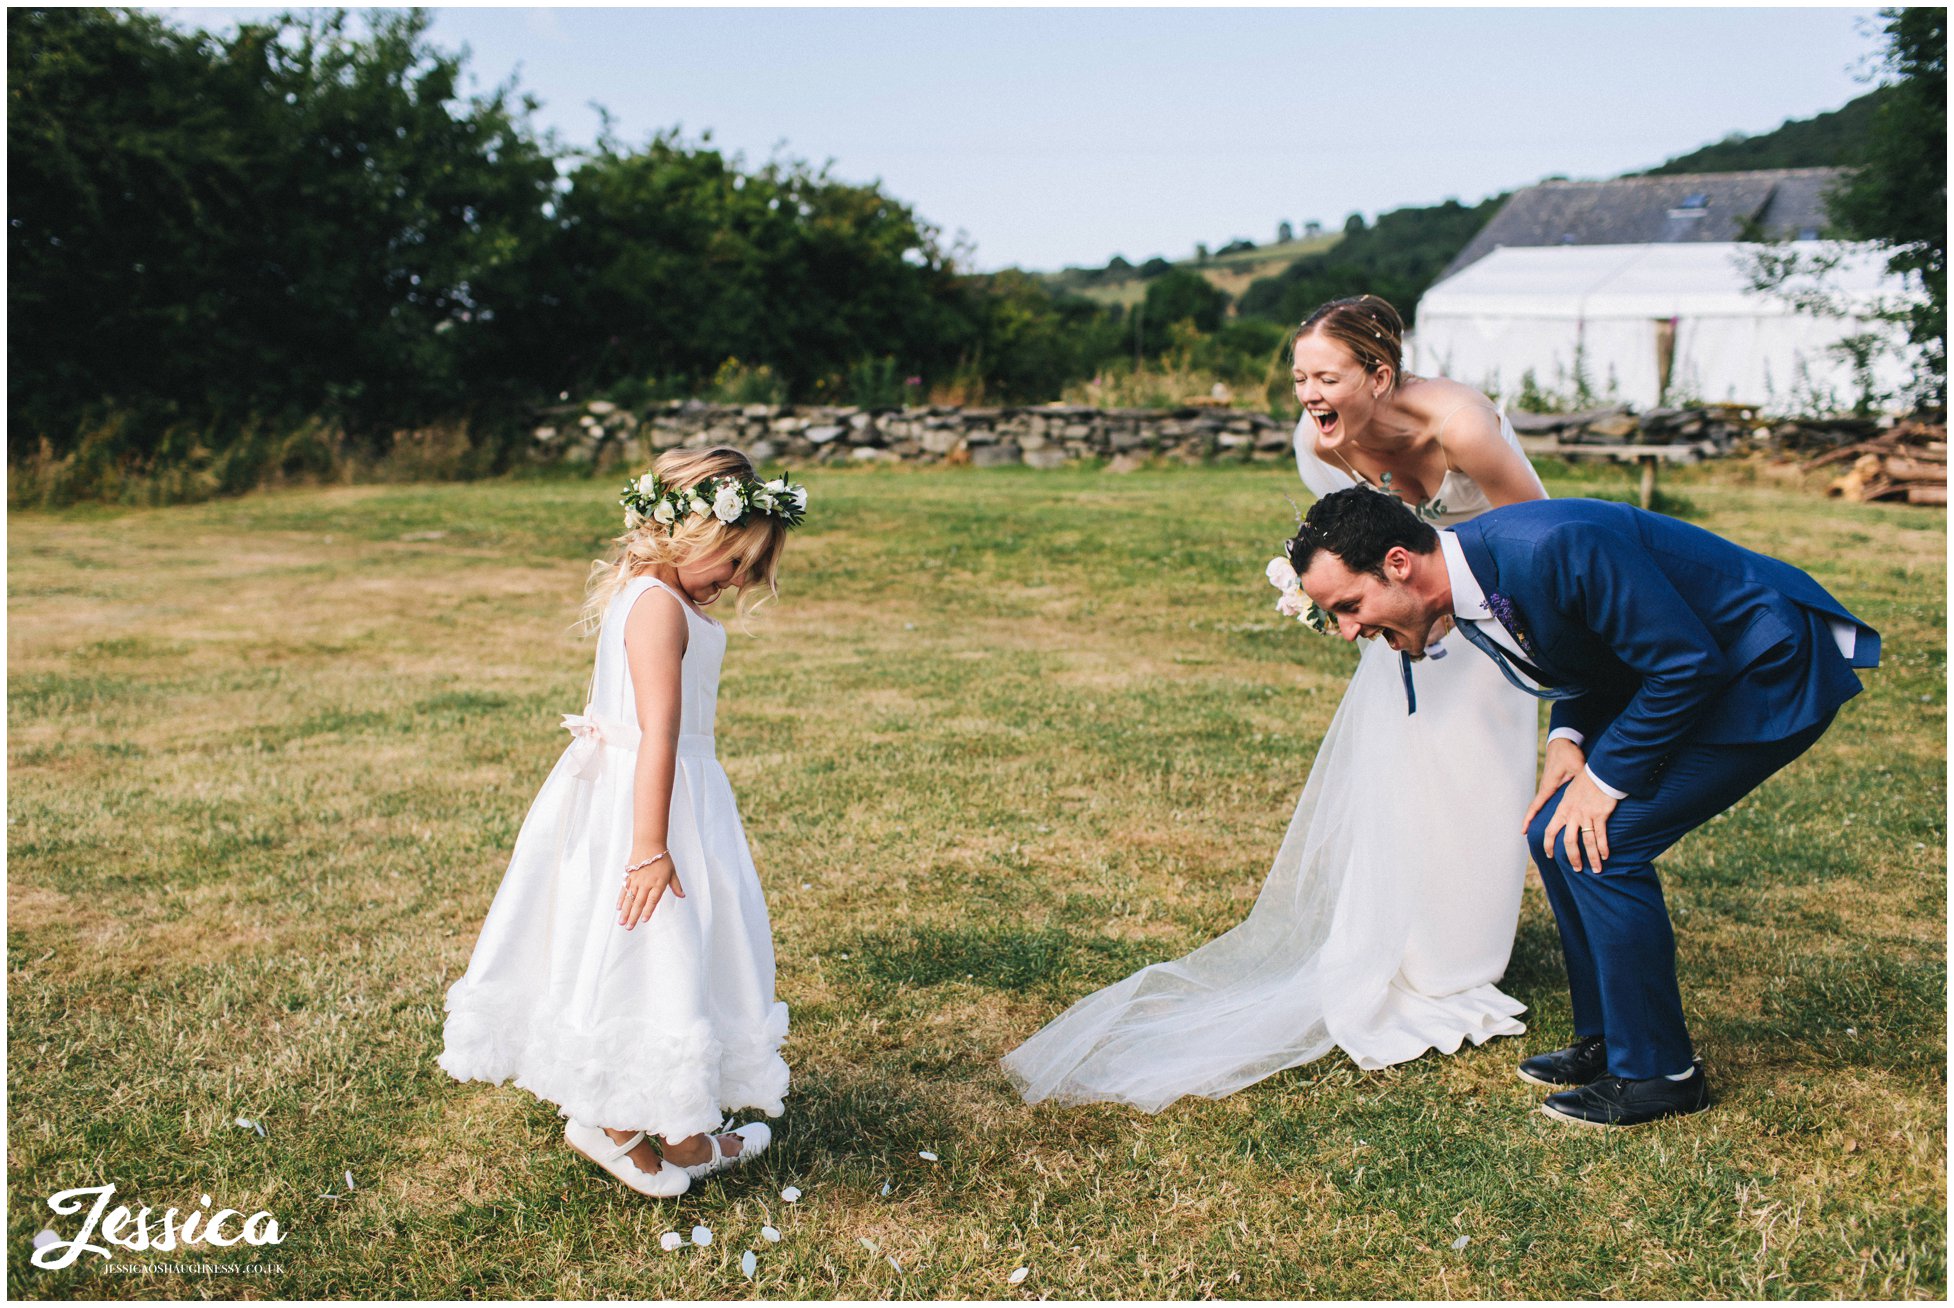 flower girl throws confetti over the couple